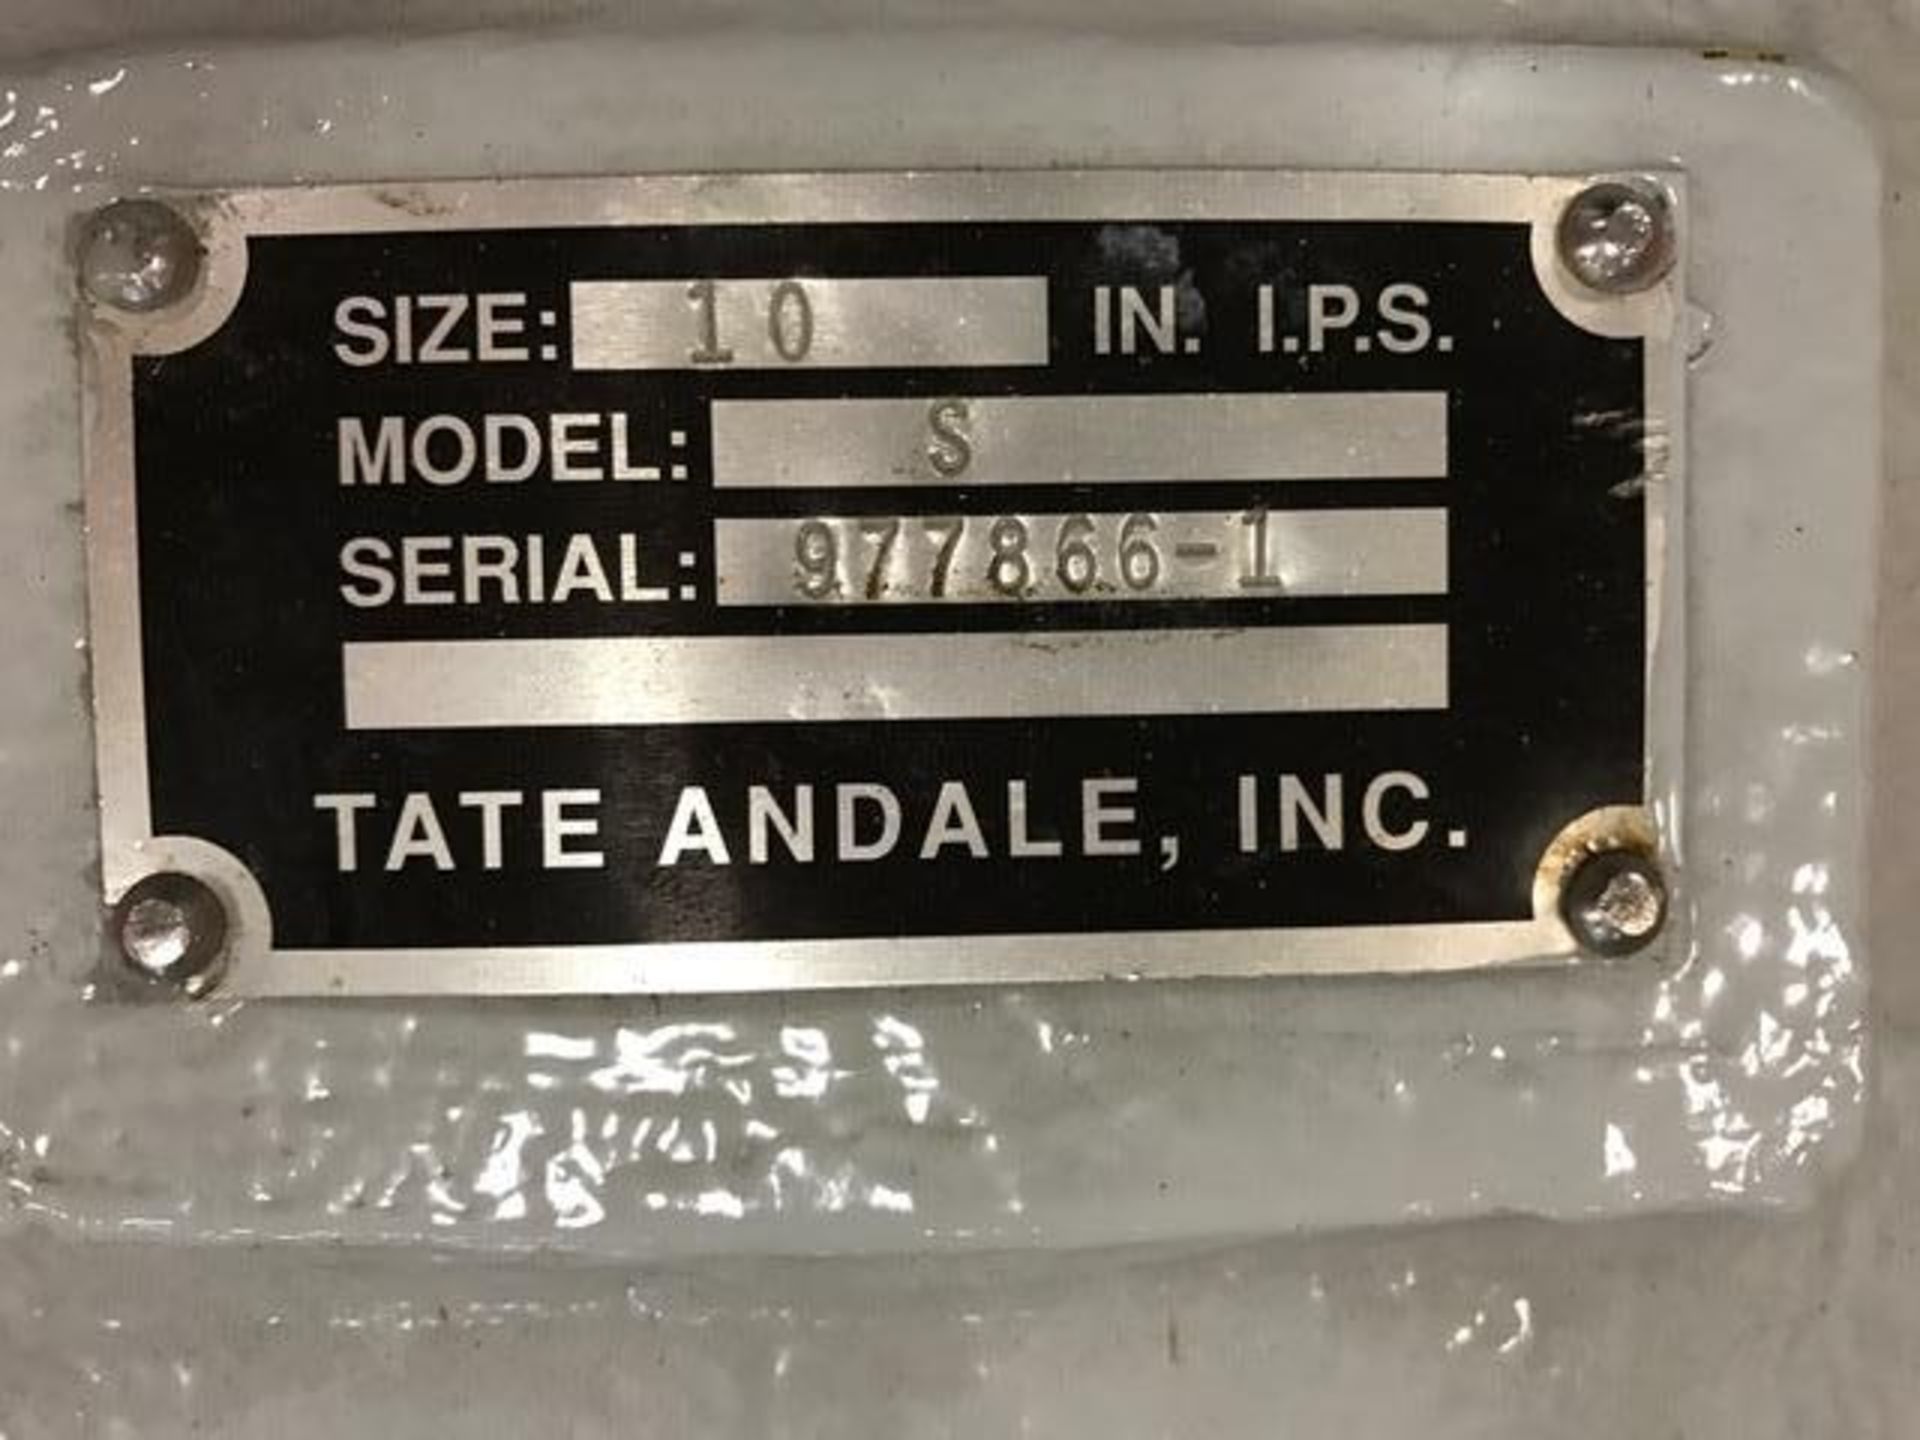 BRAND NEW TATE ANDALE STRAINER & LID MODEL S SIZE: 10 IN. I.P.S. - Image 5 of 9